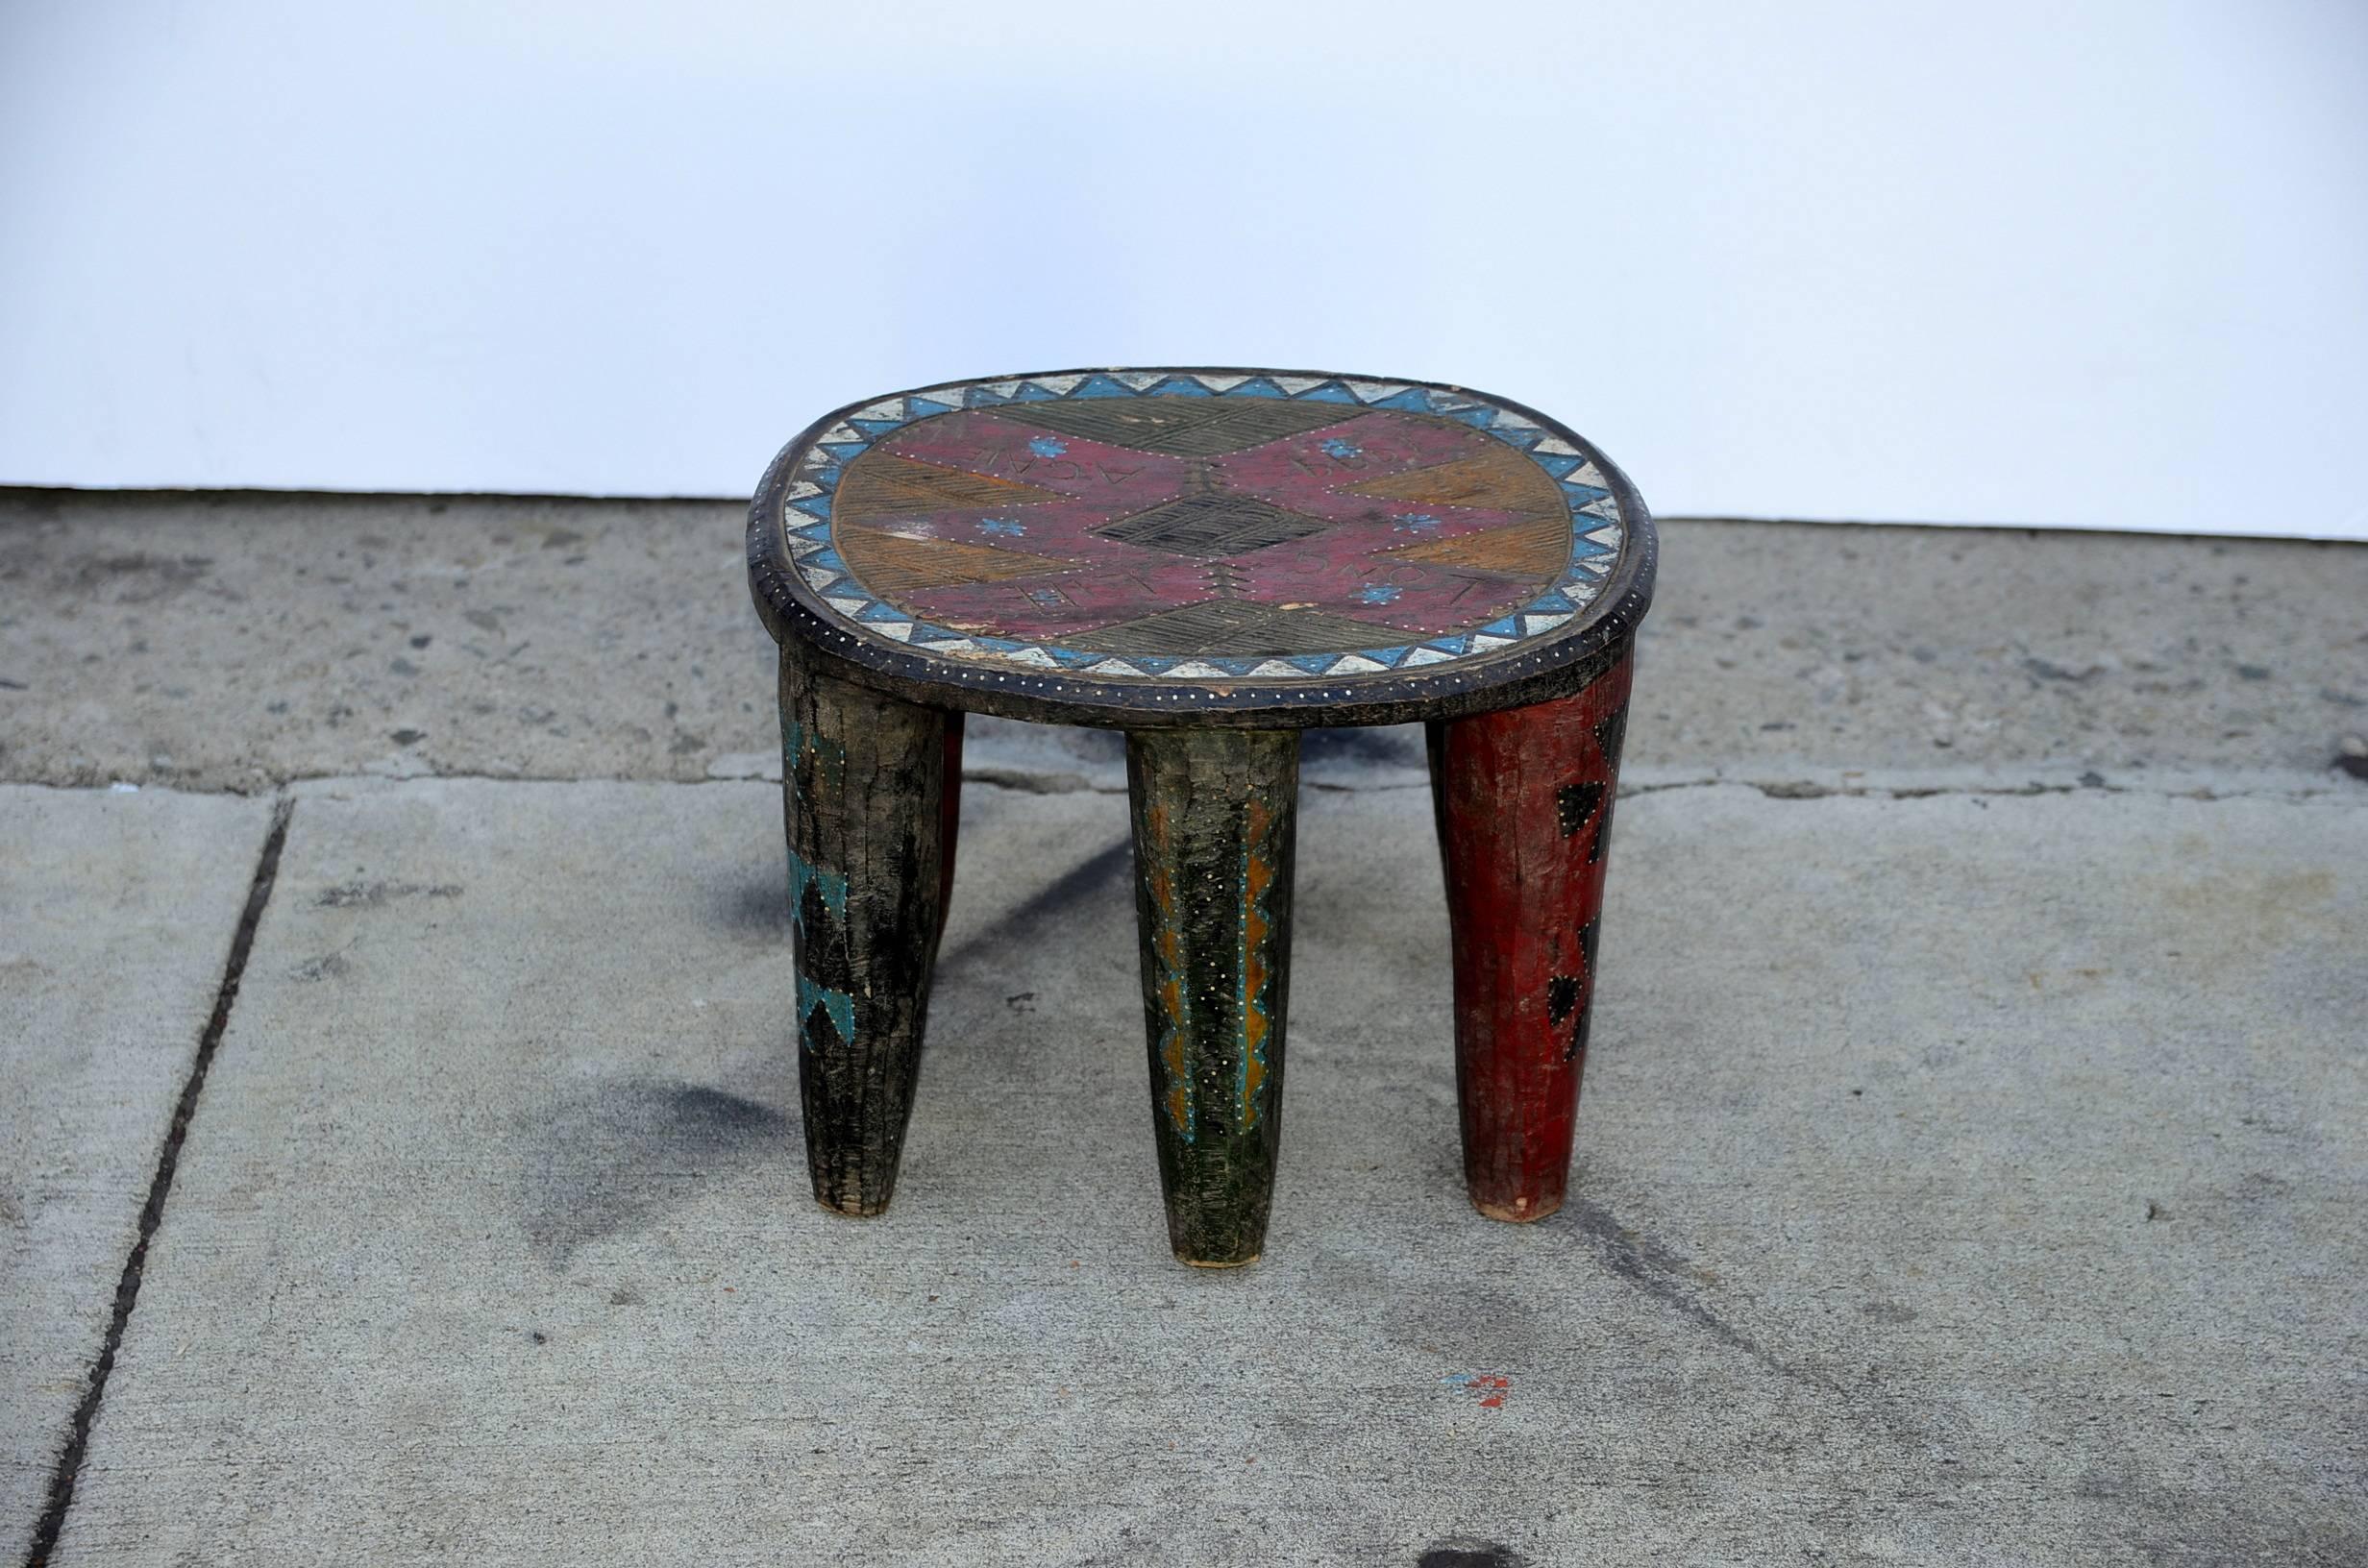 Painted Vintage African Stool: Long Life.